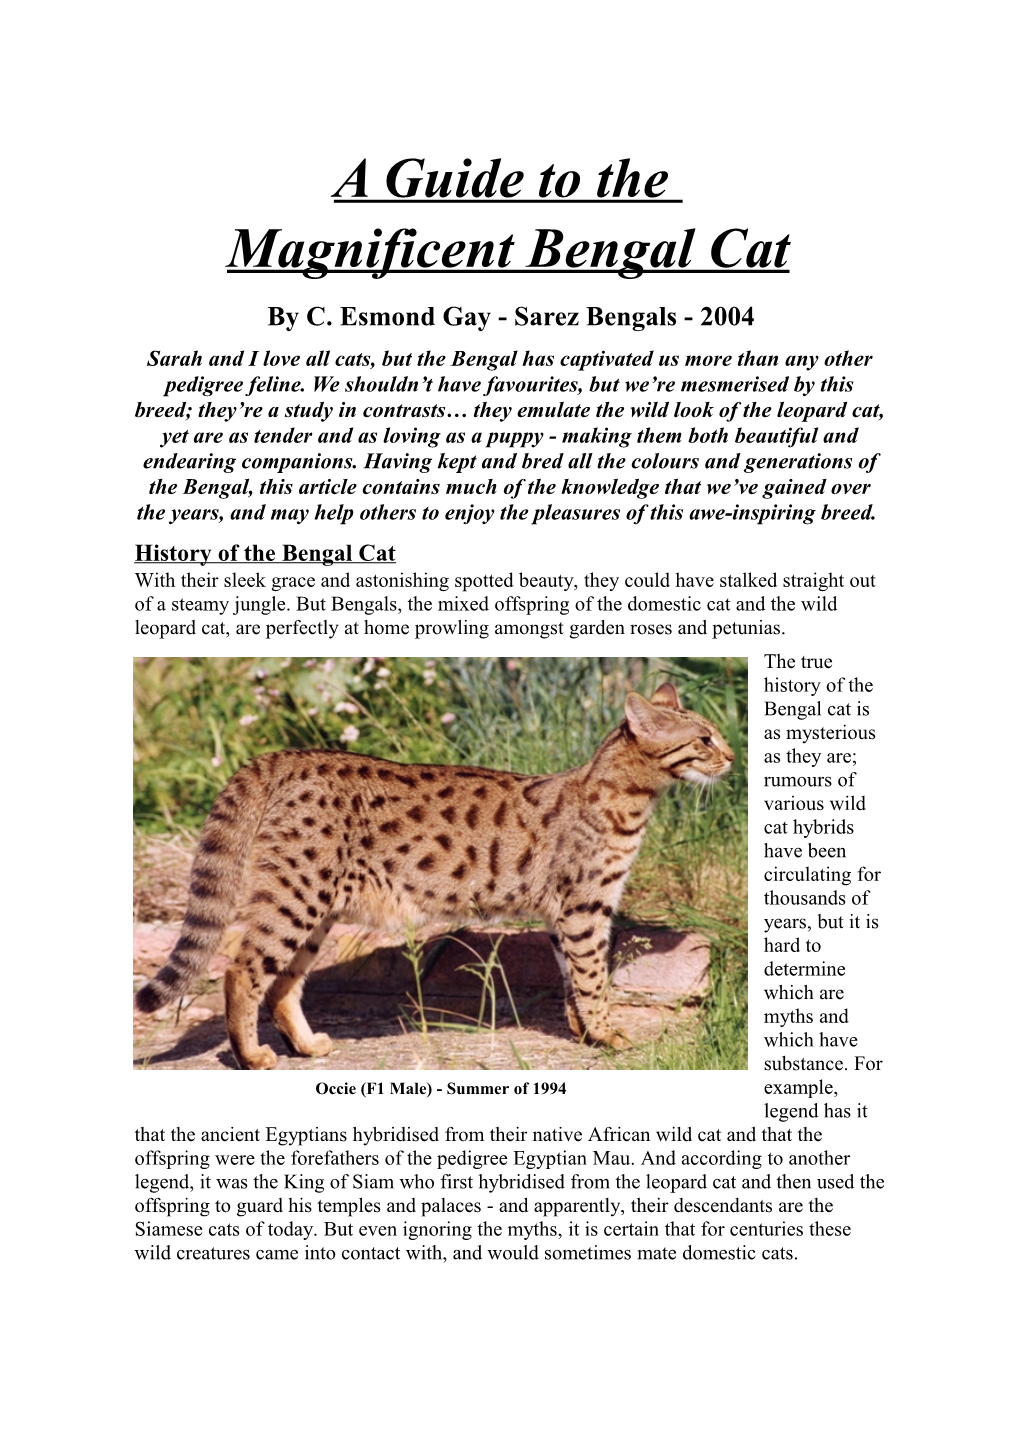 A Guide to the Magnificent Bengal Cat by C